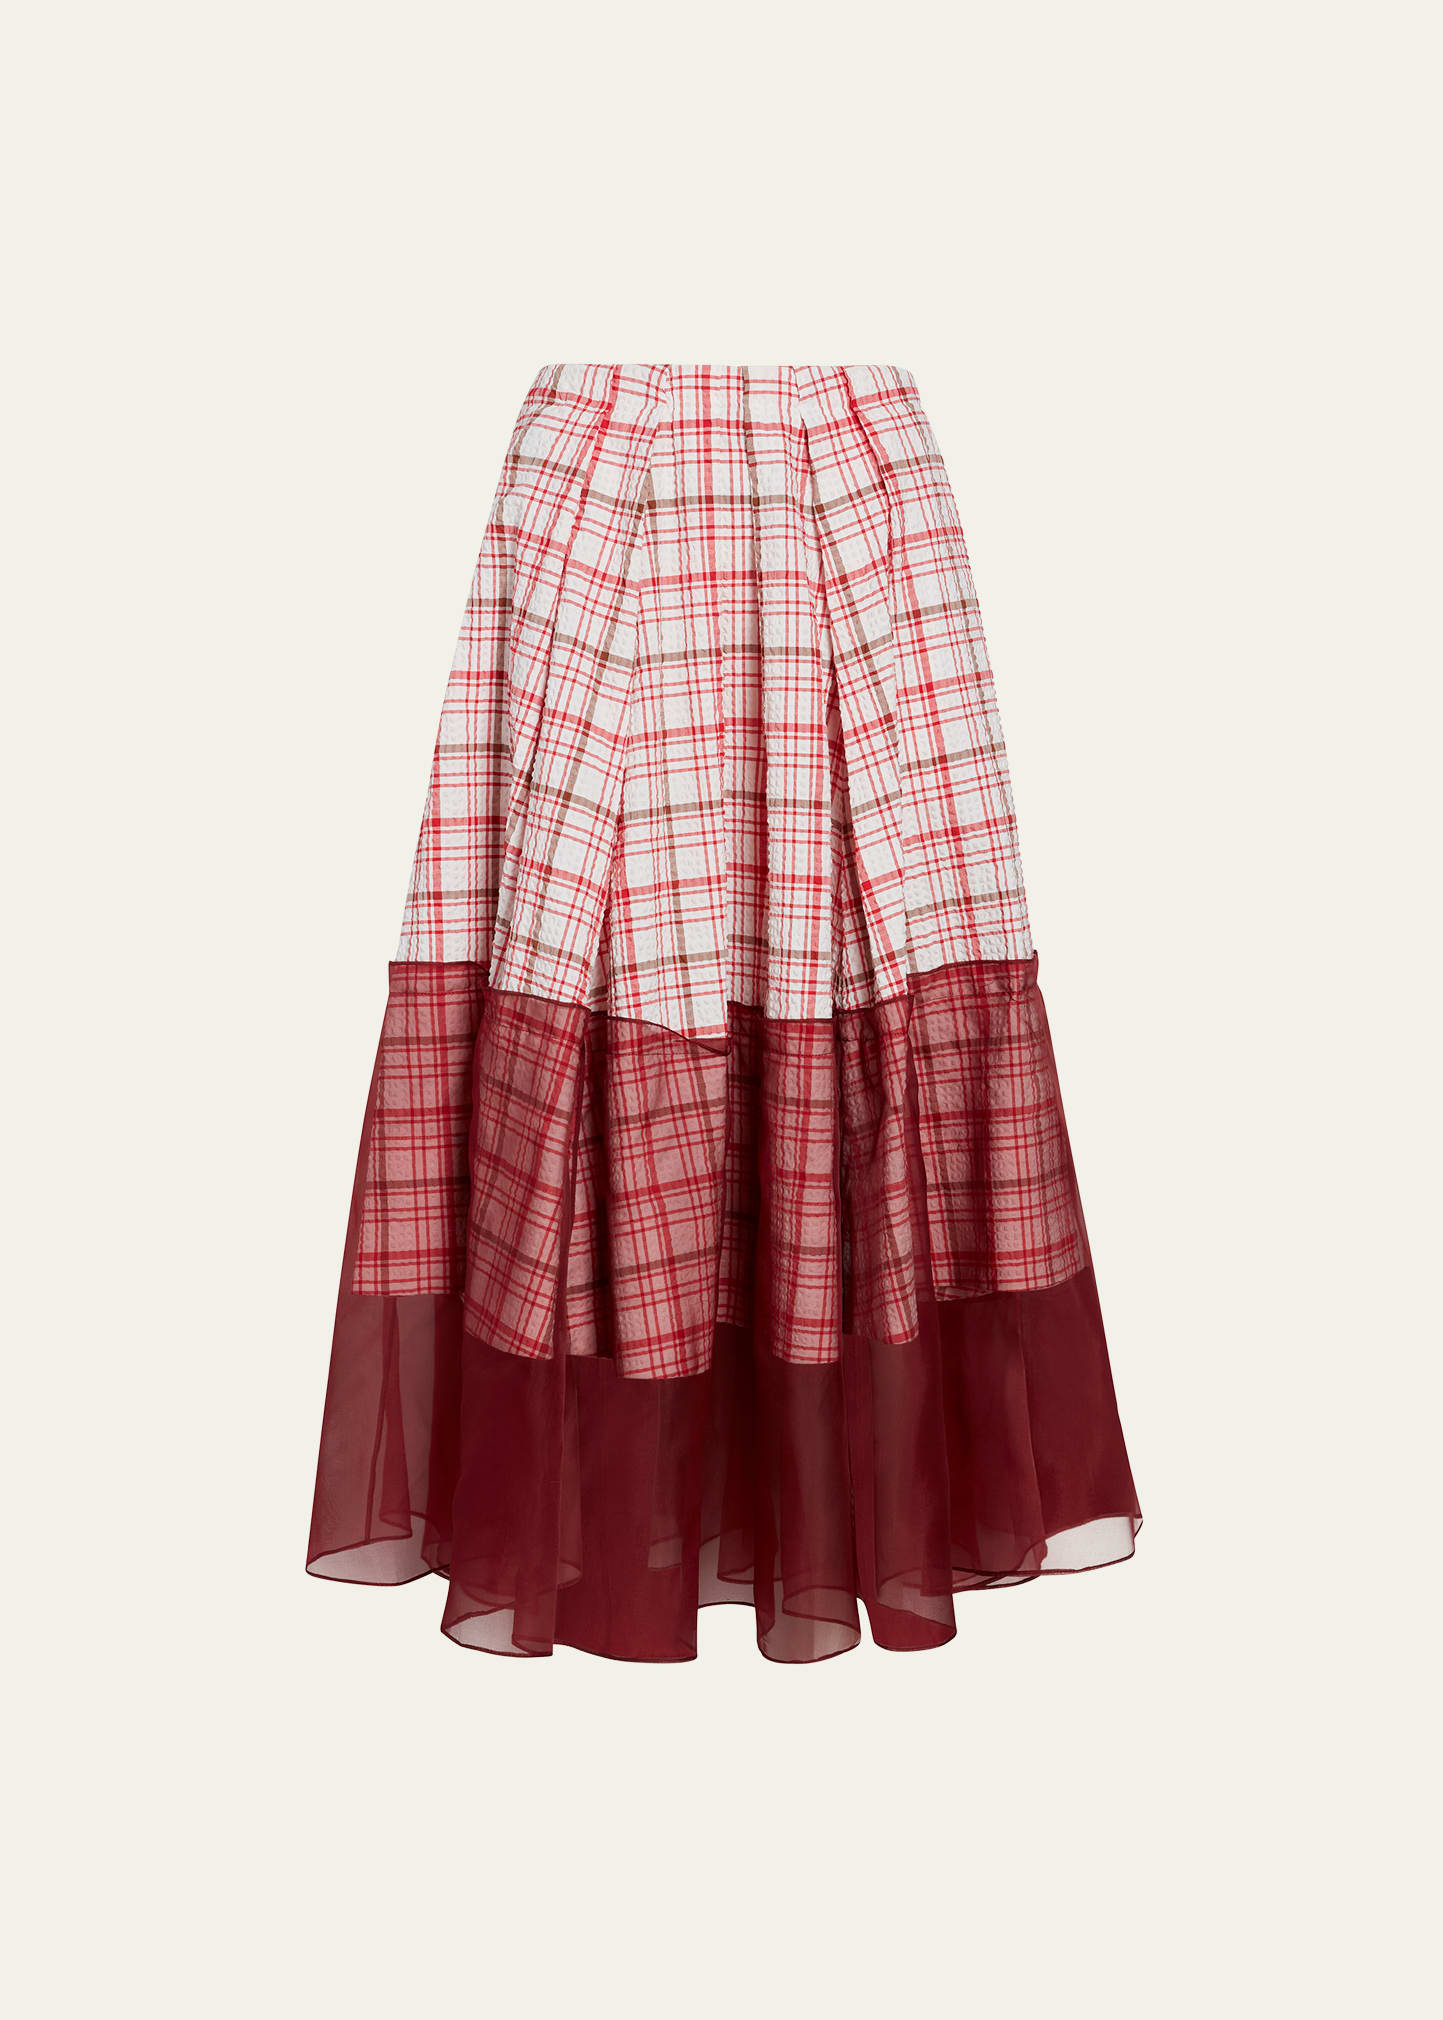 Rosie Assoulin I Sheer Right Through You Plaid Midi Skirt In Red/brown/